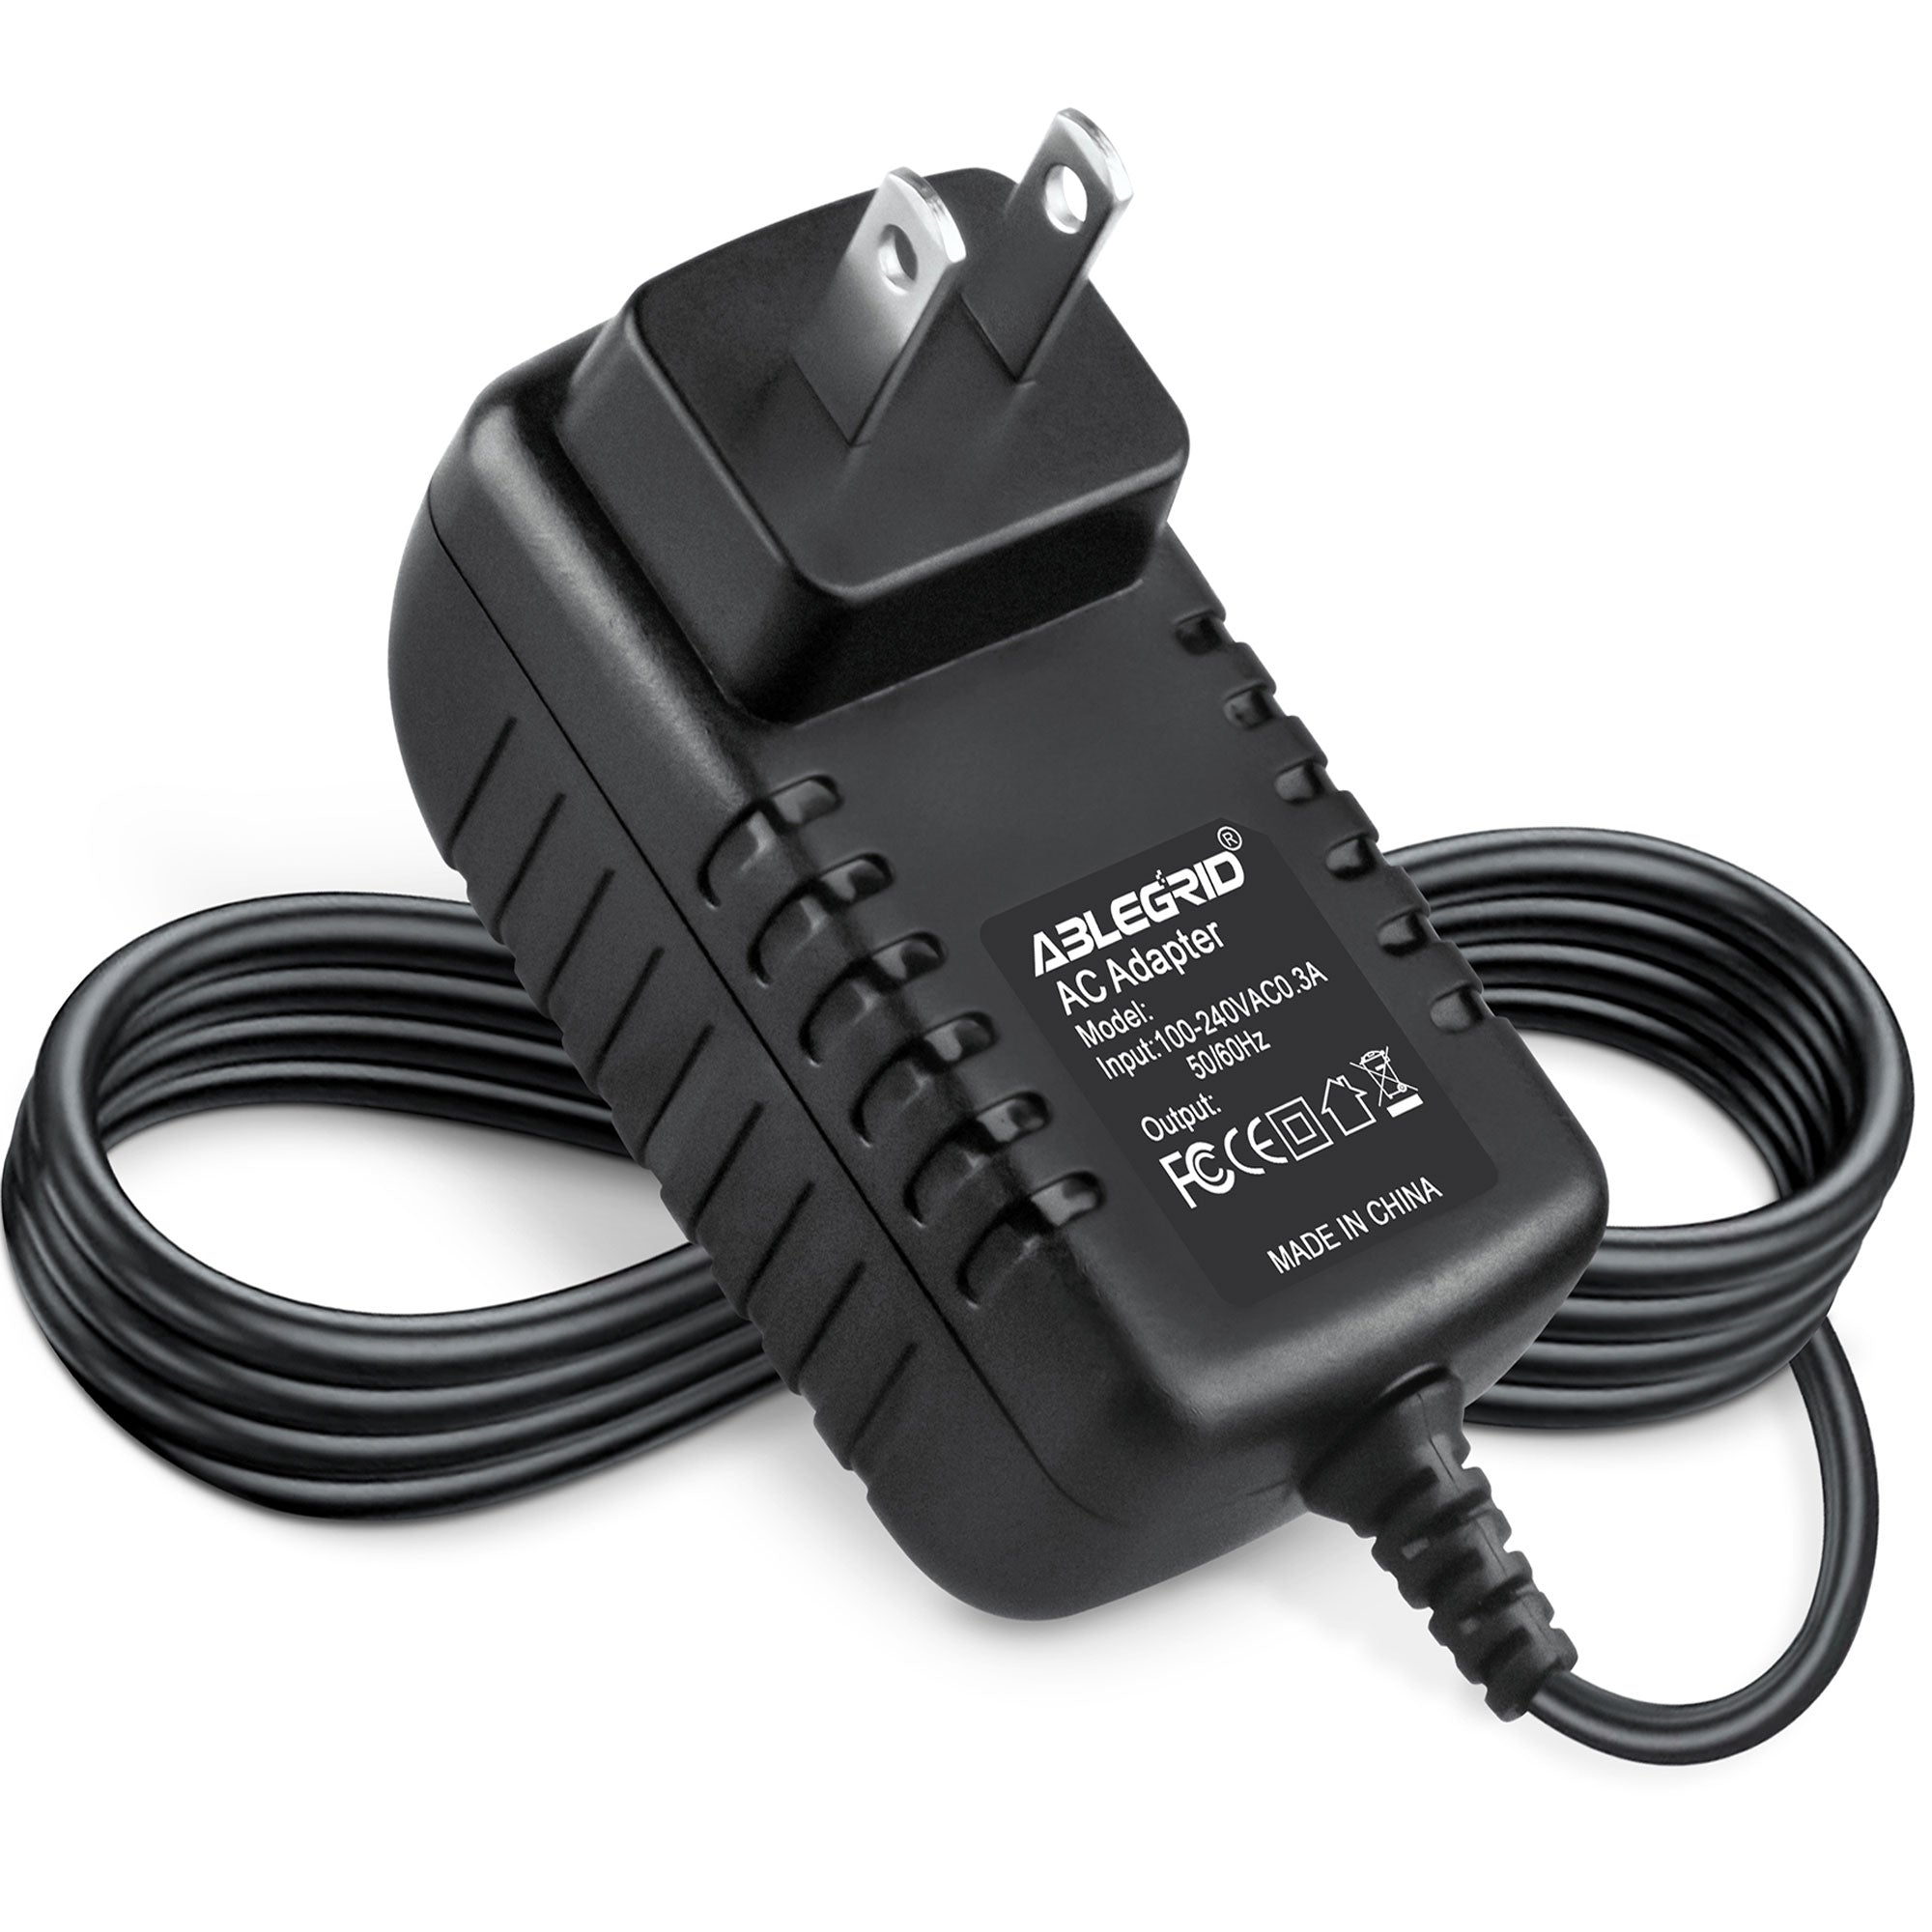 AbleGrid AC / DC Adapter for TOPCON Ranger Tripod Data Systems H-076-335-200T-032 GPS Survey Power Supply Cord Cable Battery Charger Input: 100 - 240V AC Worldwide Voltage Use Mains PSU